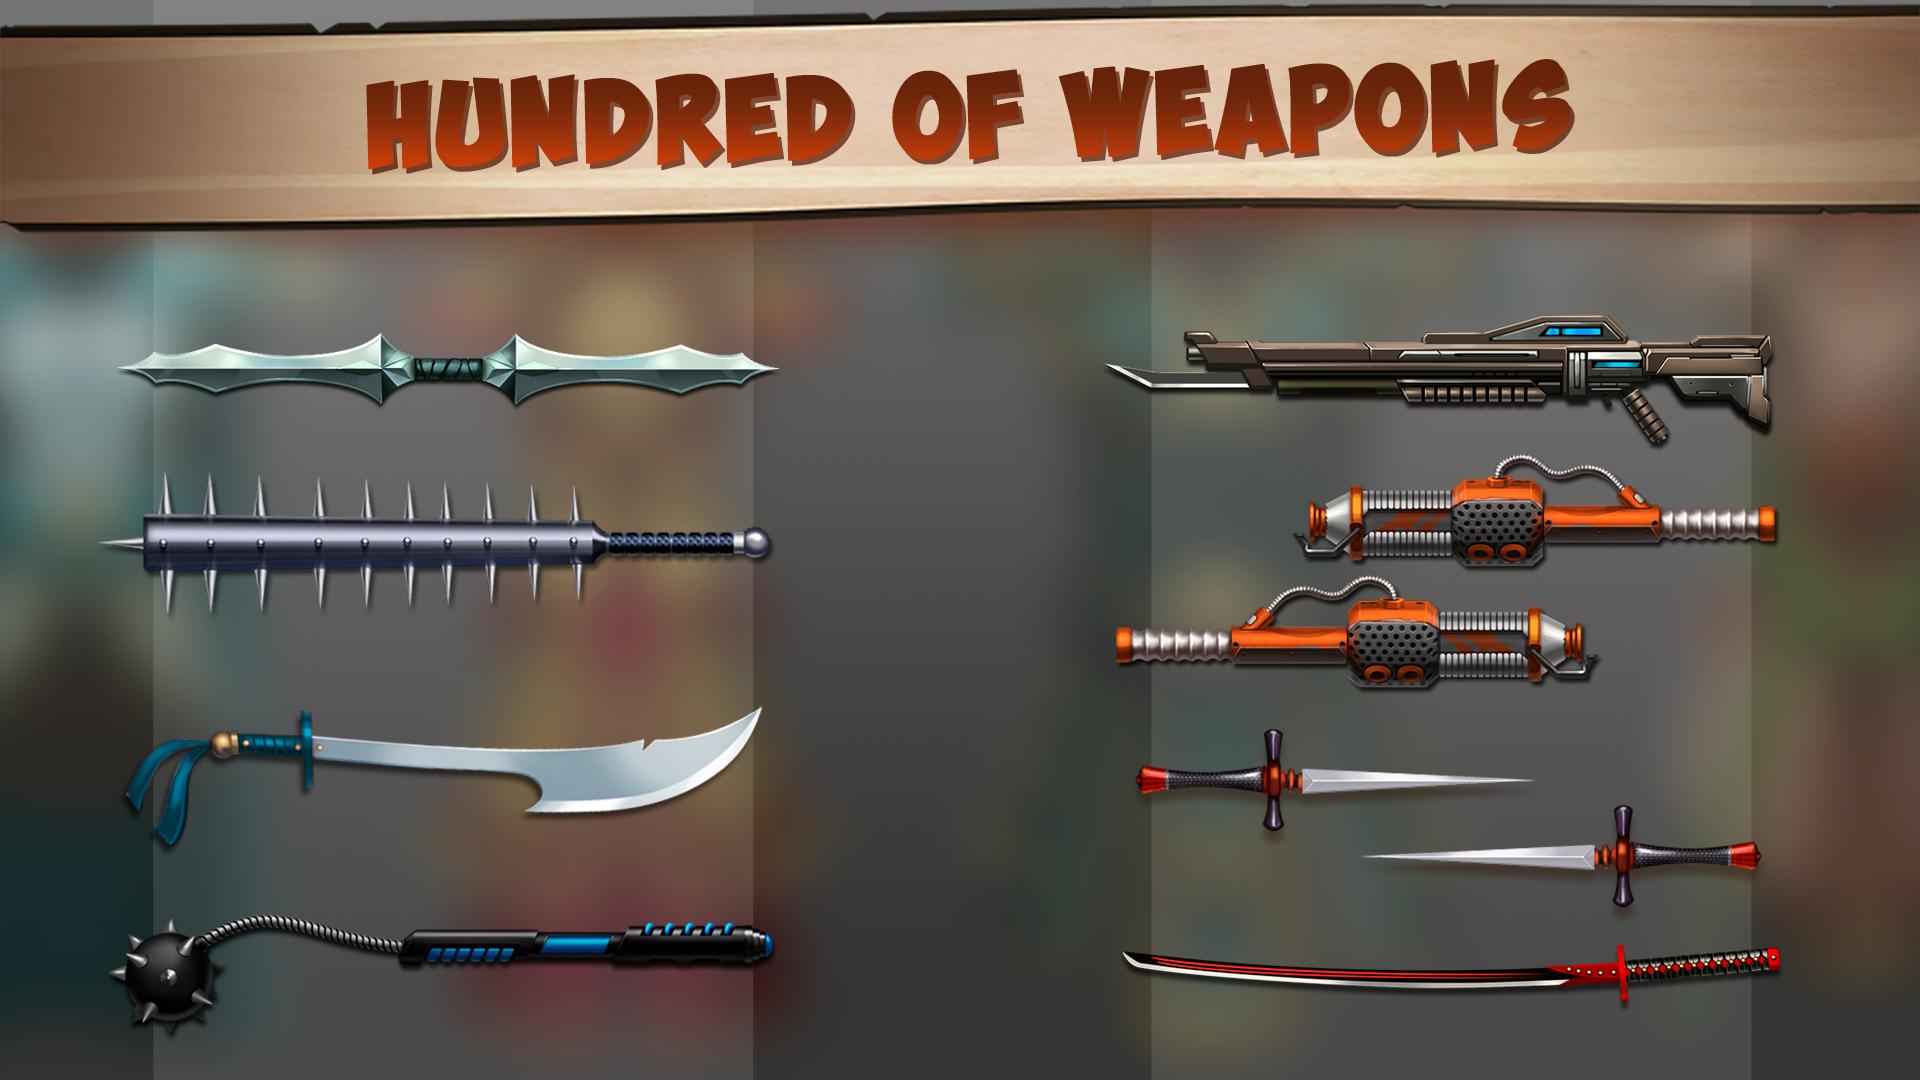 shadow fight 2 last weapons